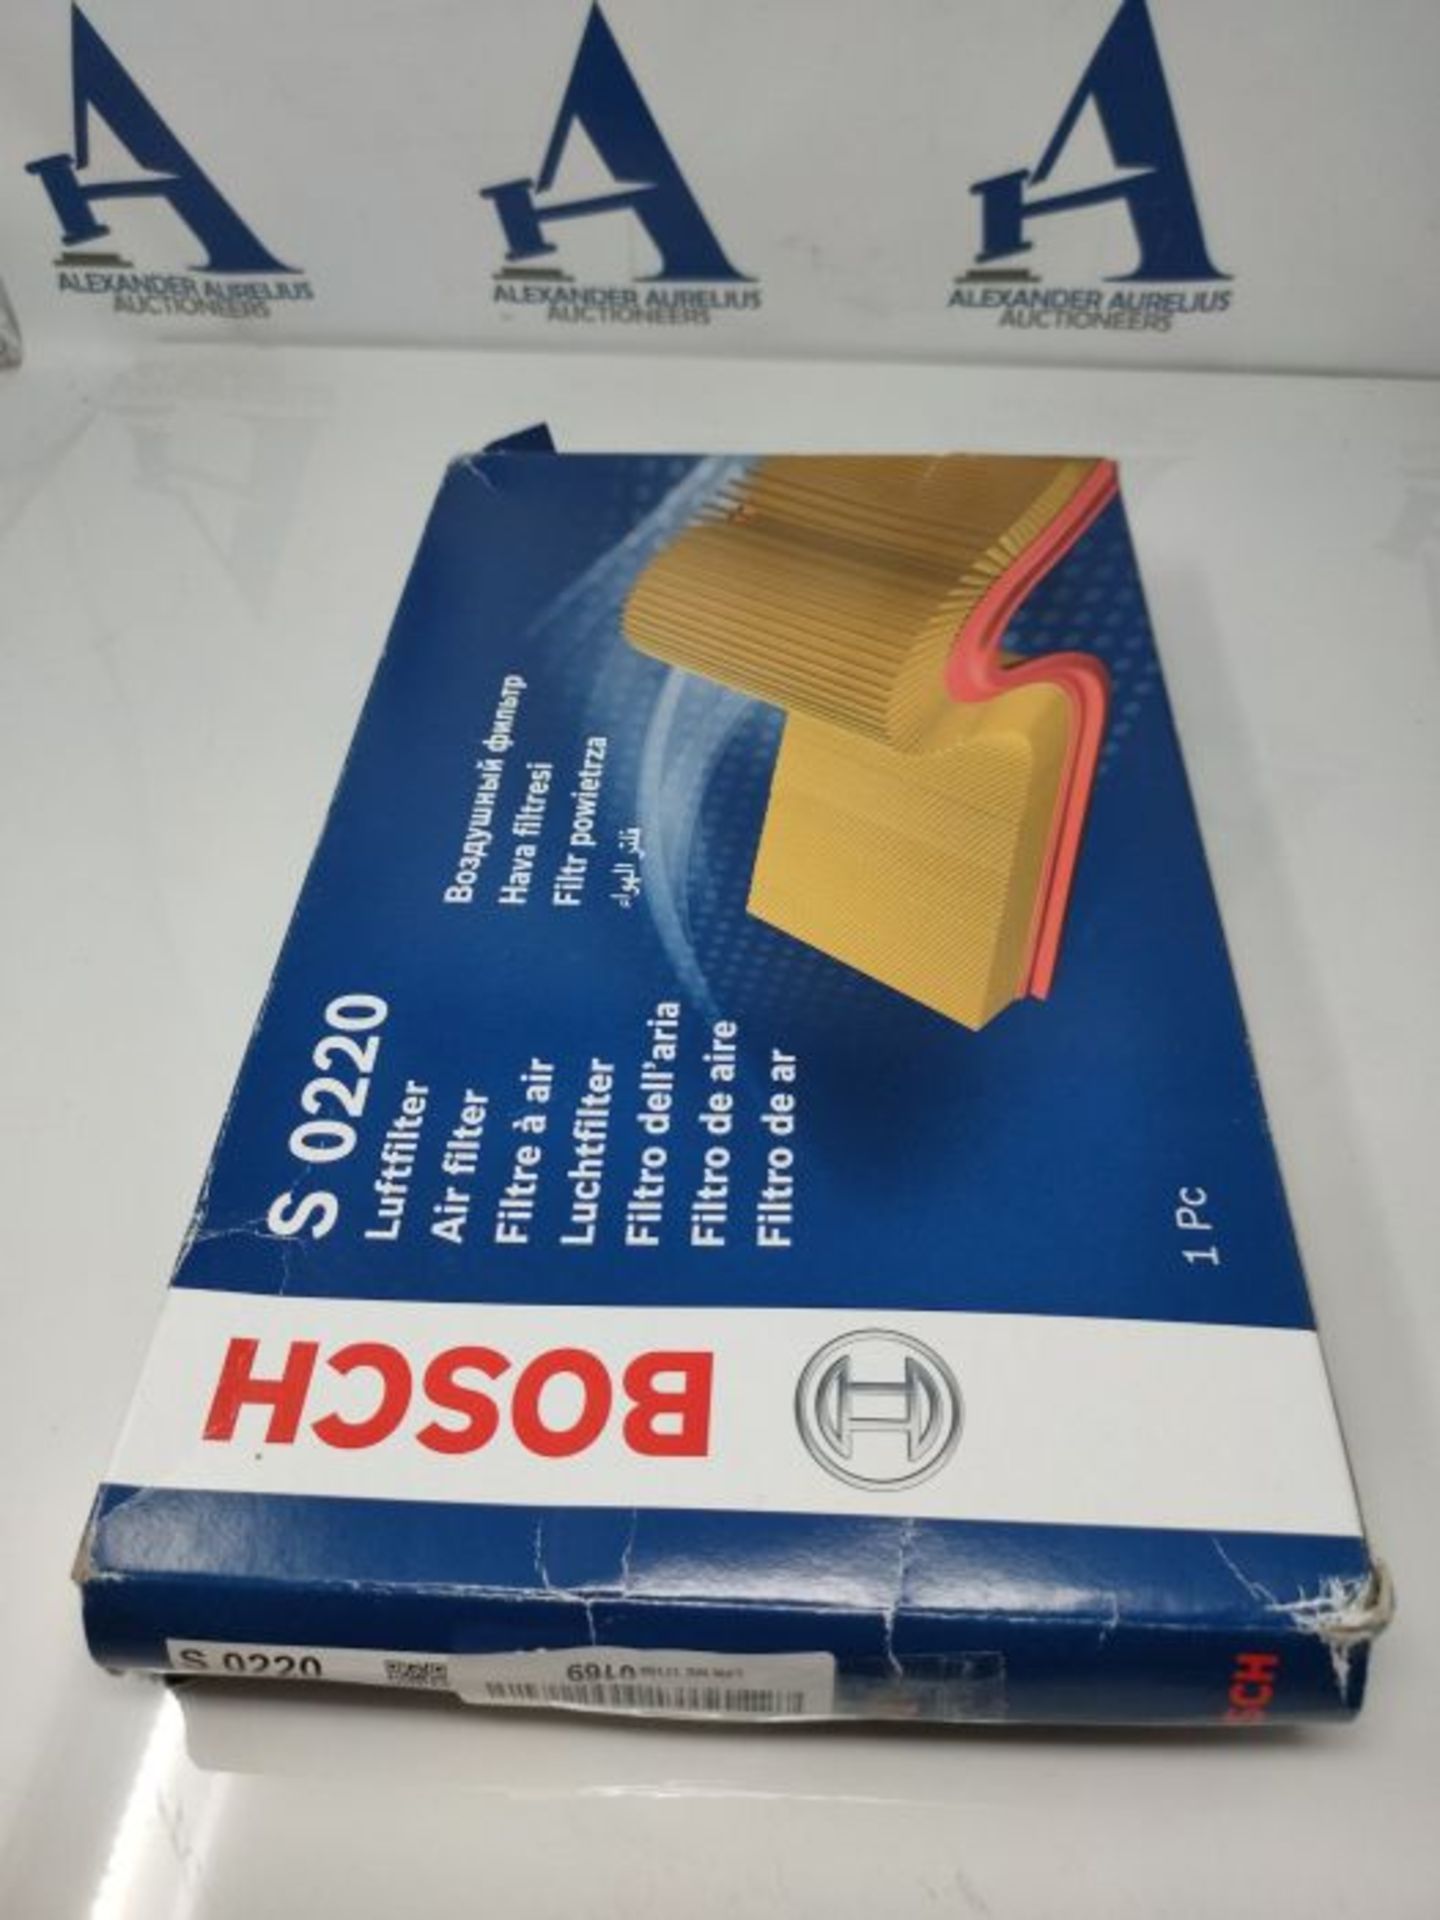 Bosch S0220 - Air Filter Car - Image 5 of 6